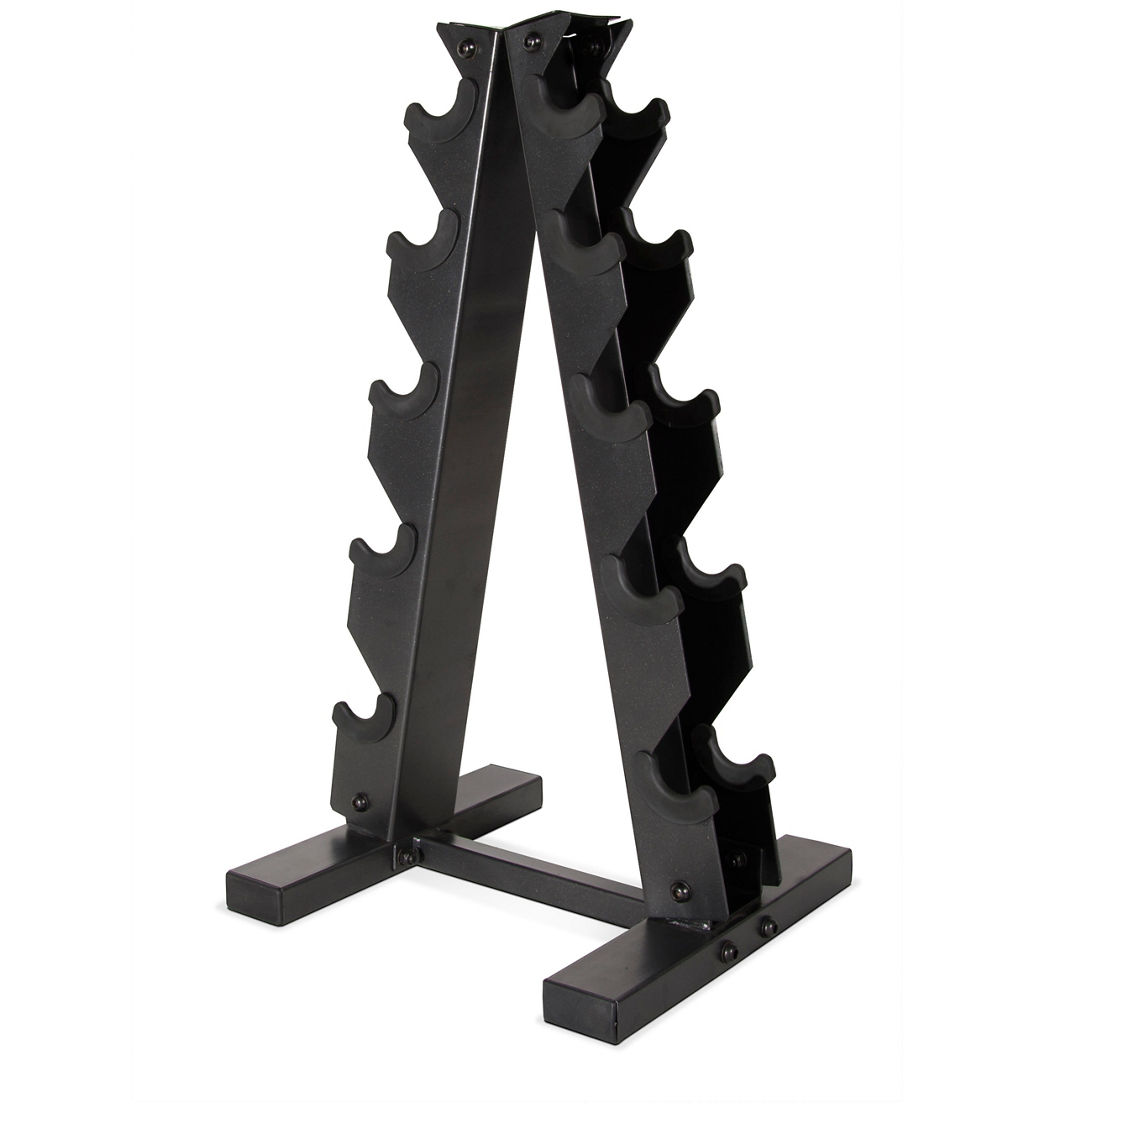 CAP A-style Dumbbell Stand - Image 2 of 2